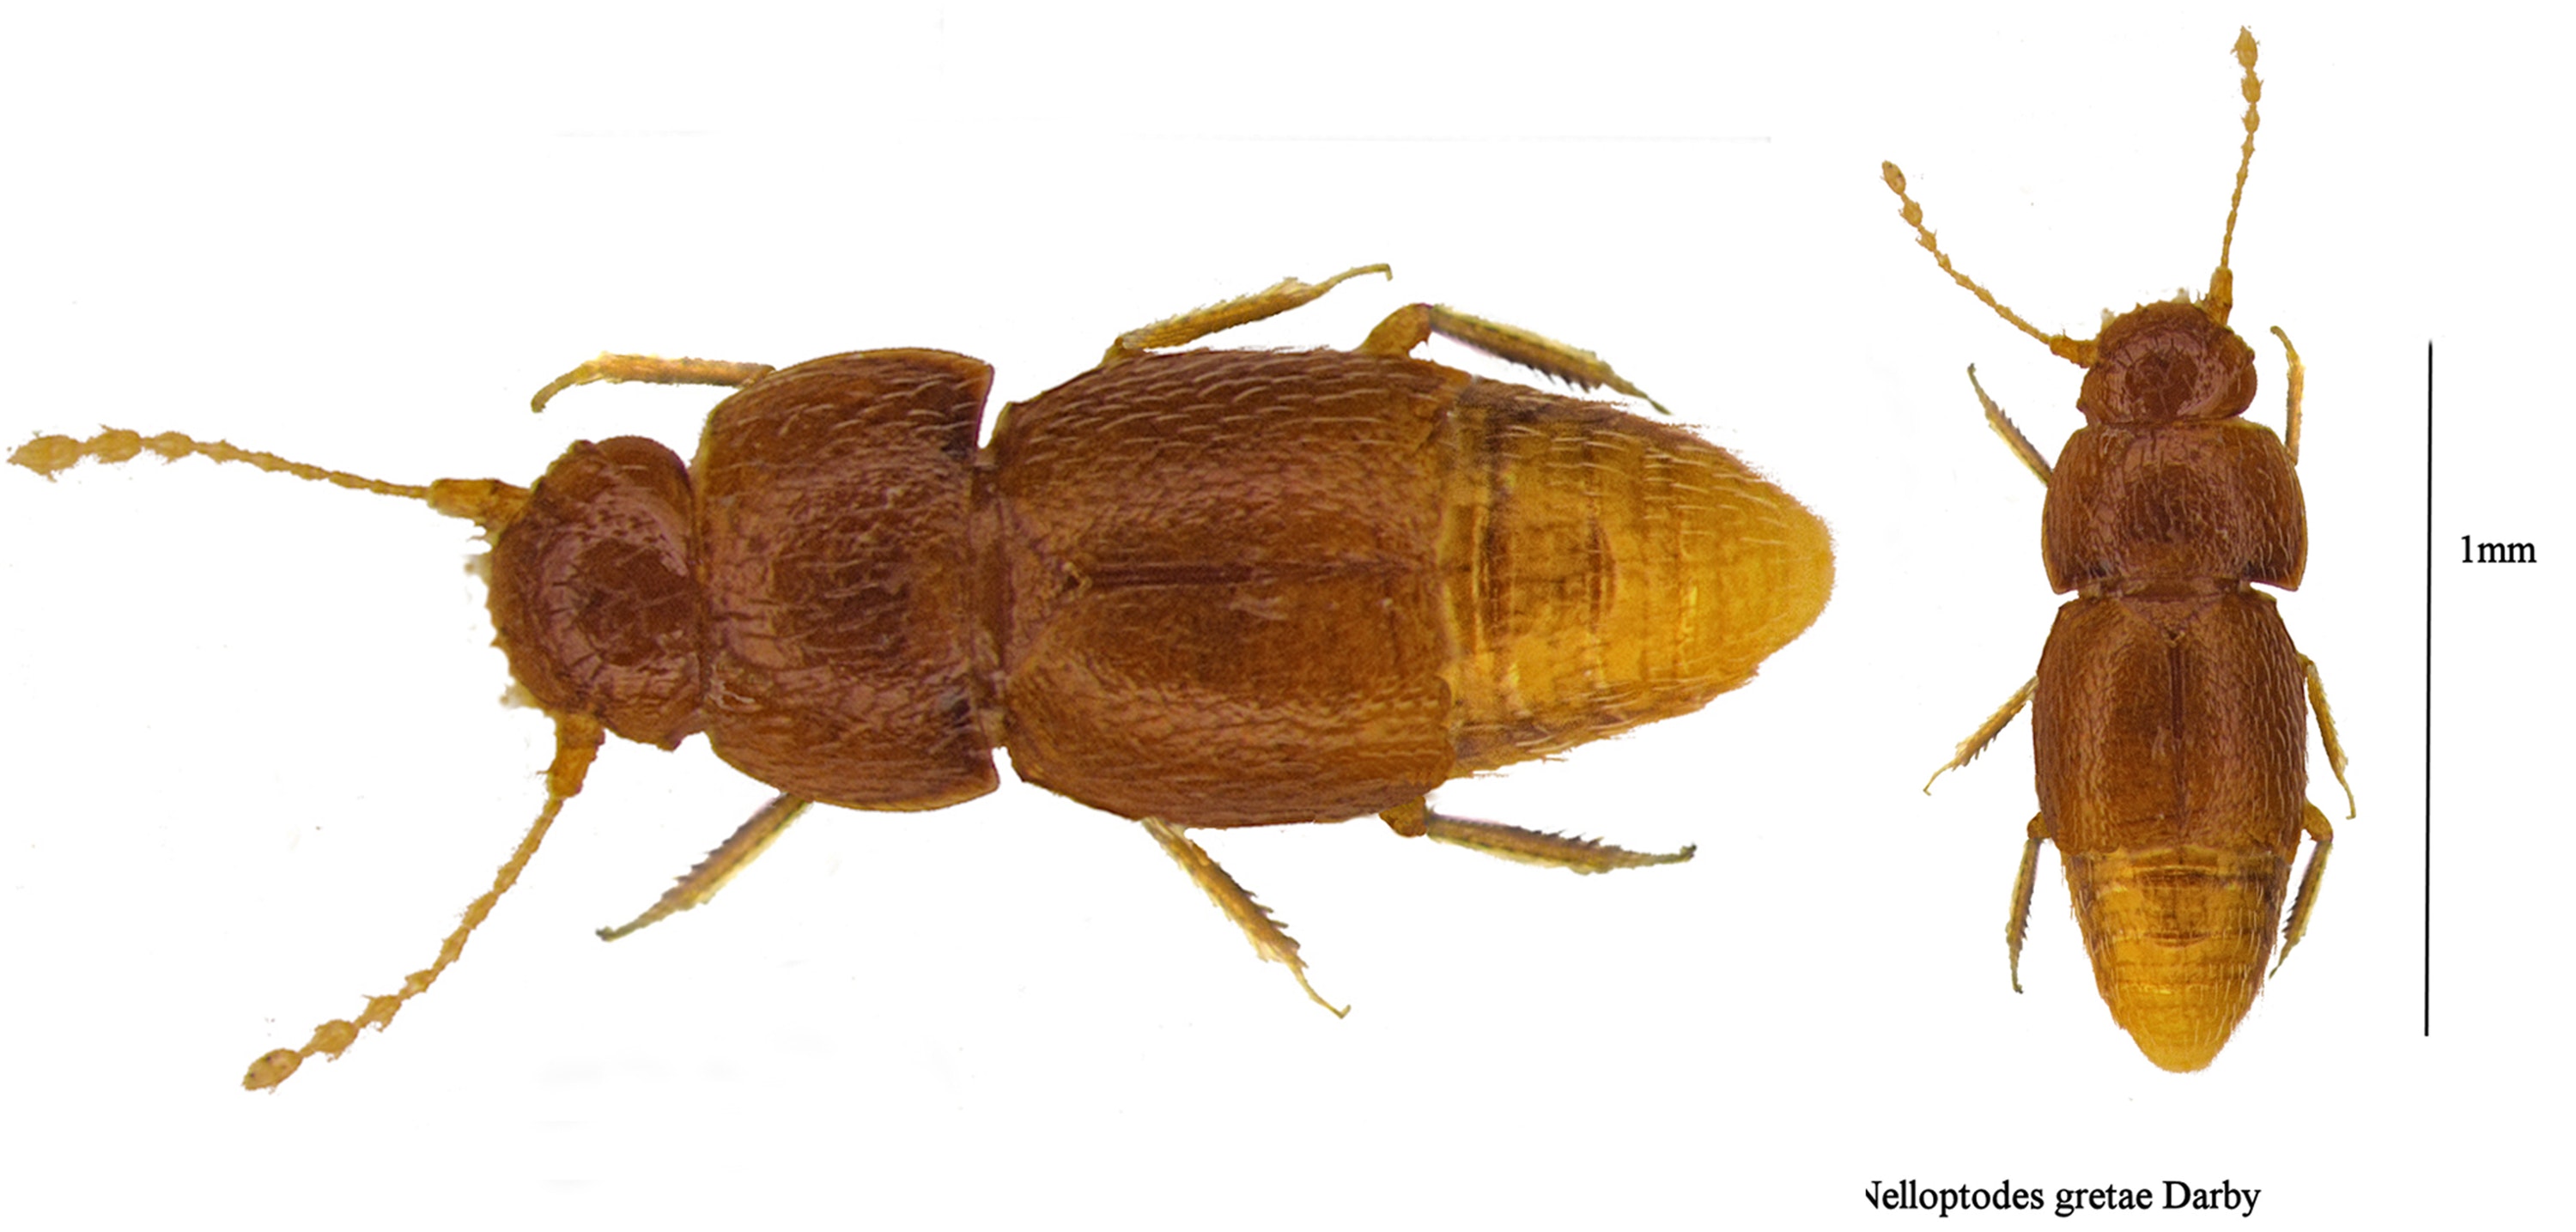 A brown beetle shown at two different angles. It has long pincers and a body shaped liked a peanut.